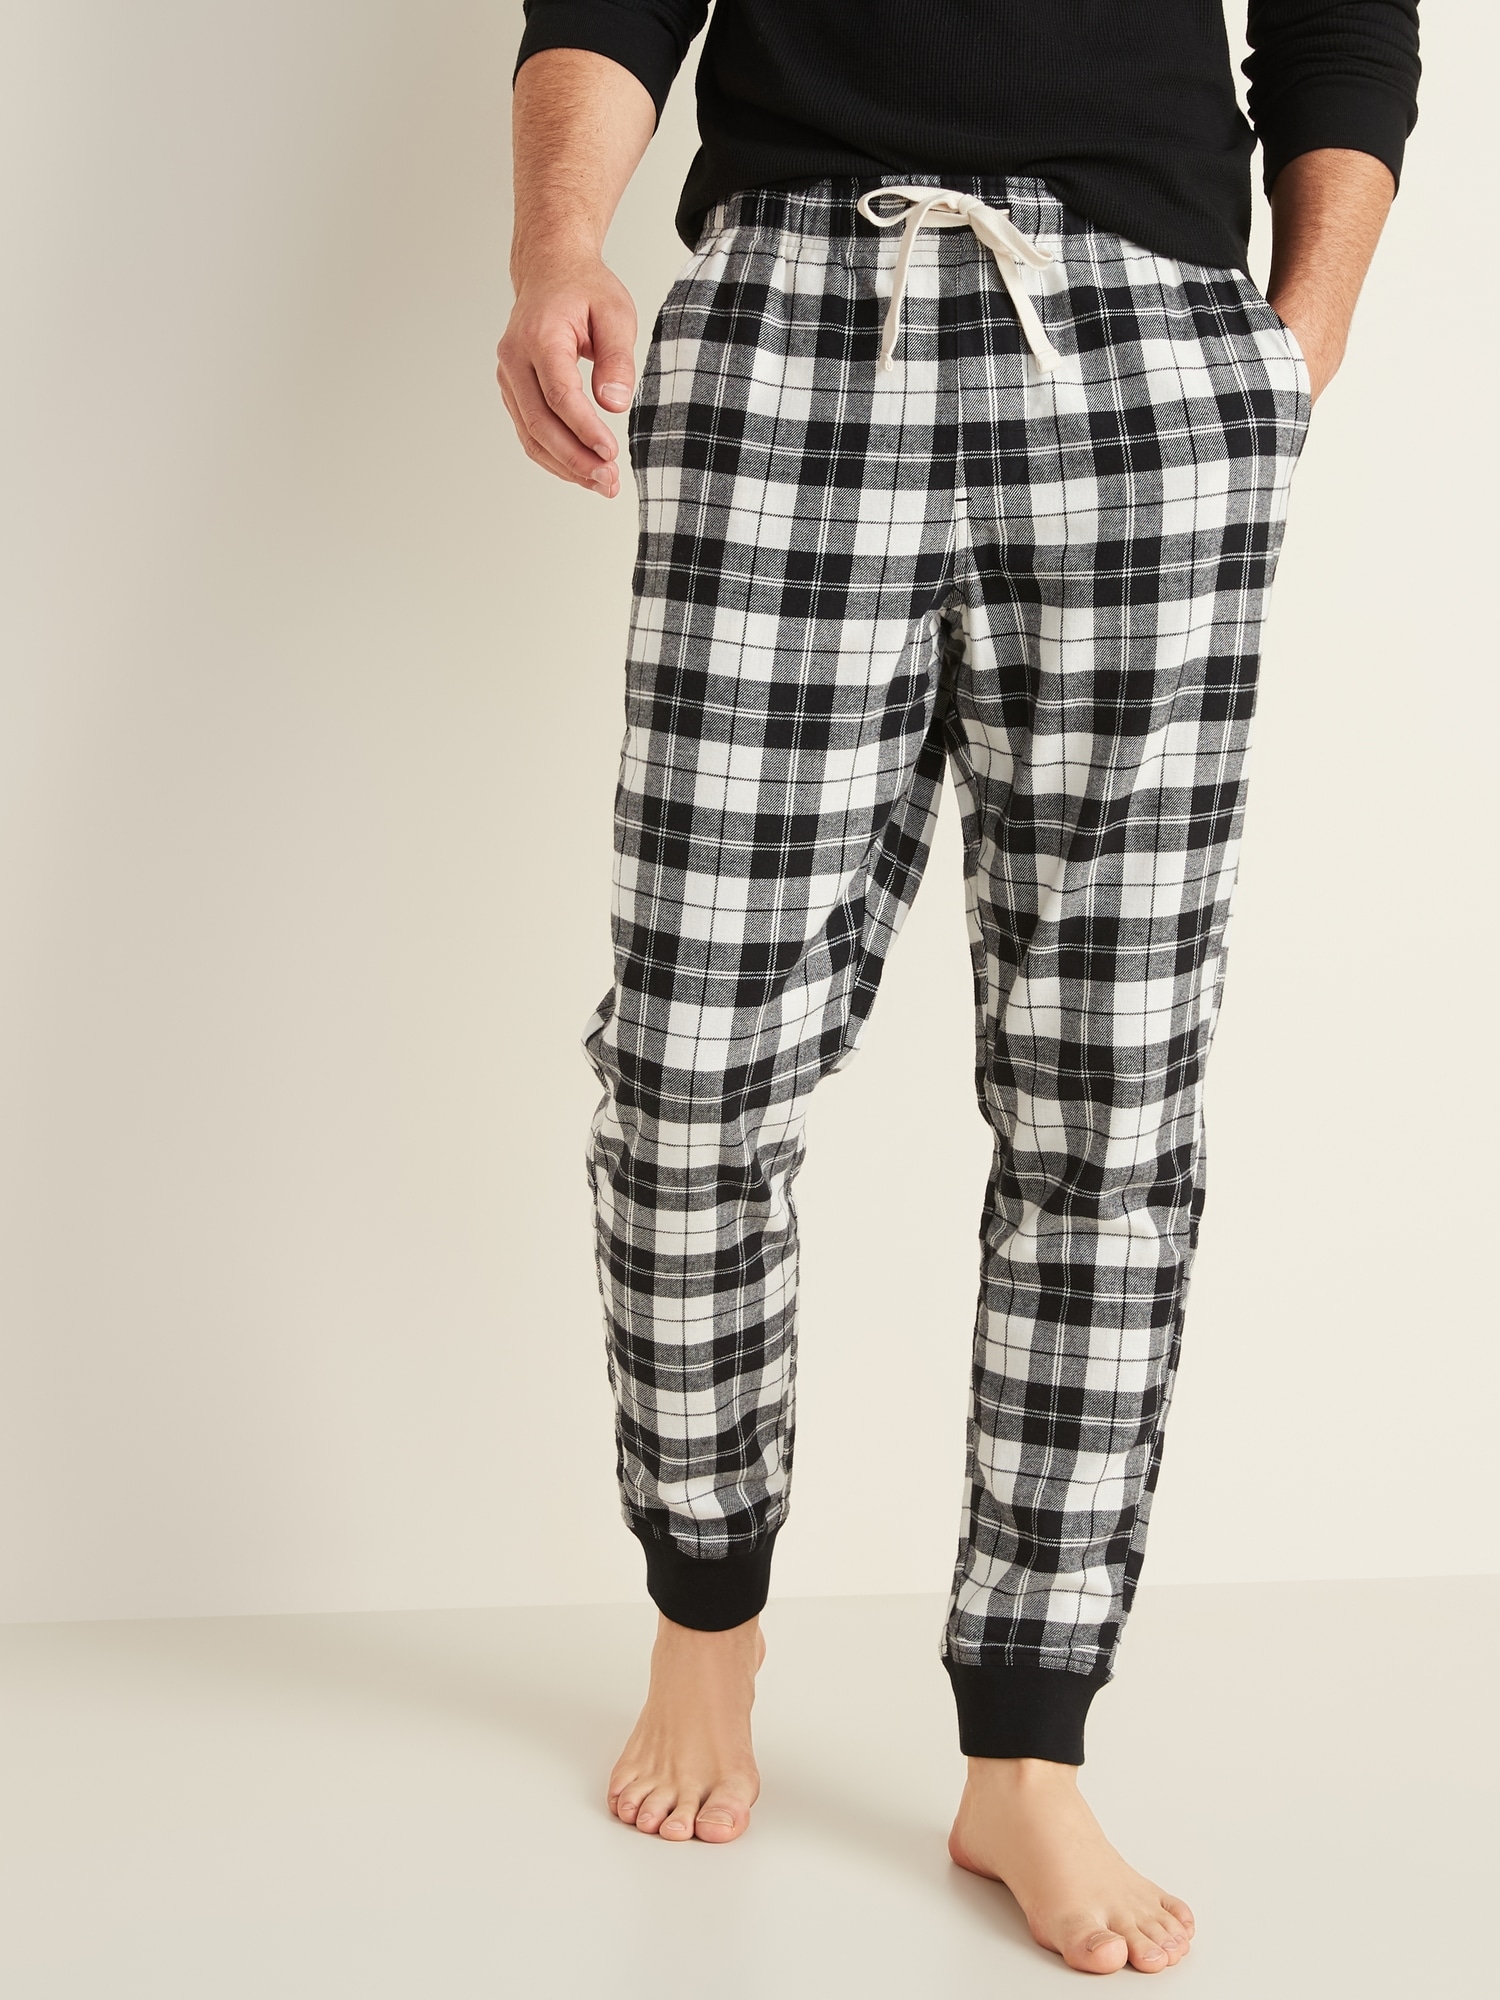 Patterned Flannel Pajama Joggers for Men